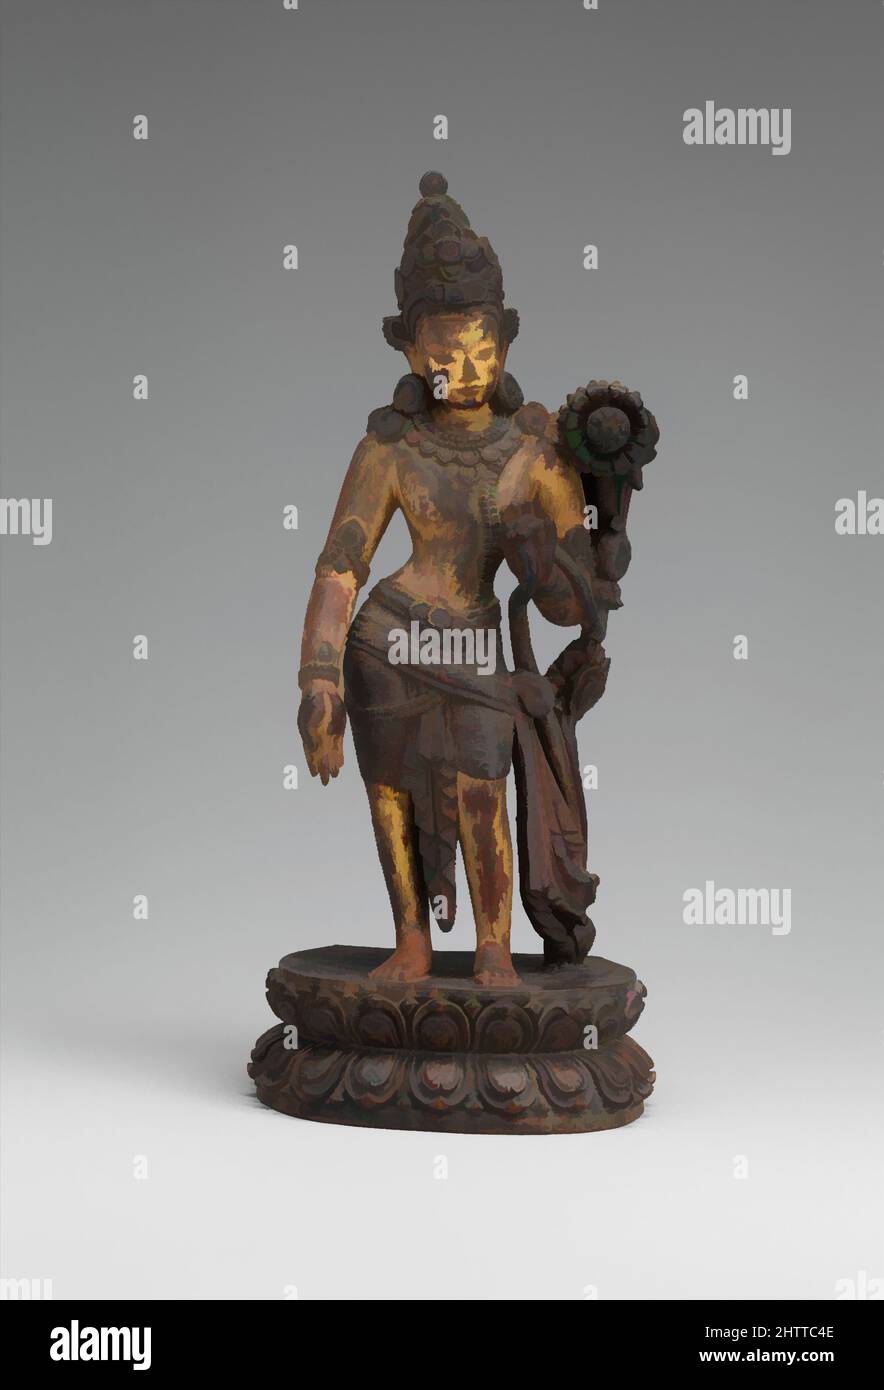 Art inspired by Standing Avalokiteshvara, 16th century, Nepal (Kathmandu Valley), Sandalwood, traces of polychrome and gold, H. 6 in. (15.2 cm), Sculpture, Avalokiteshvara, the bodhisattva of this cosmic age, is shown with one hand lowered in the boon-giving gesture (varada mudra, Classic works modernized by Artotop with a splash of modernity. Shapes, color and value, eye-catching visual impact on art. Emotions through freedom of artworks in a contemporary way. A timeless message pursuing a wildly creative new direction. Artists turning to the digital medium and creating the Artotop NFT Stock Photo